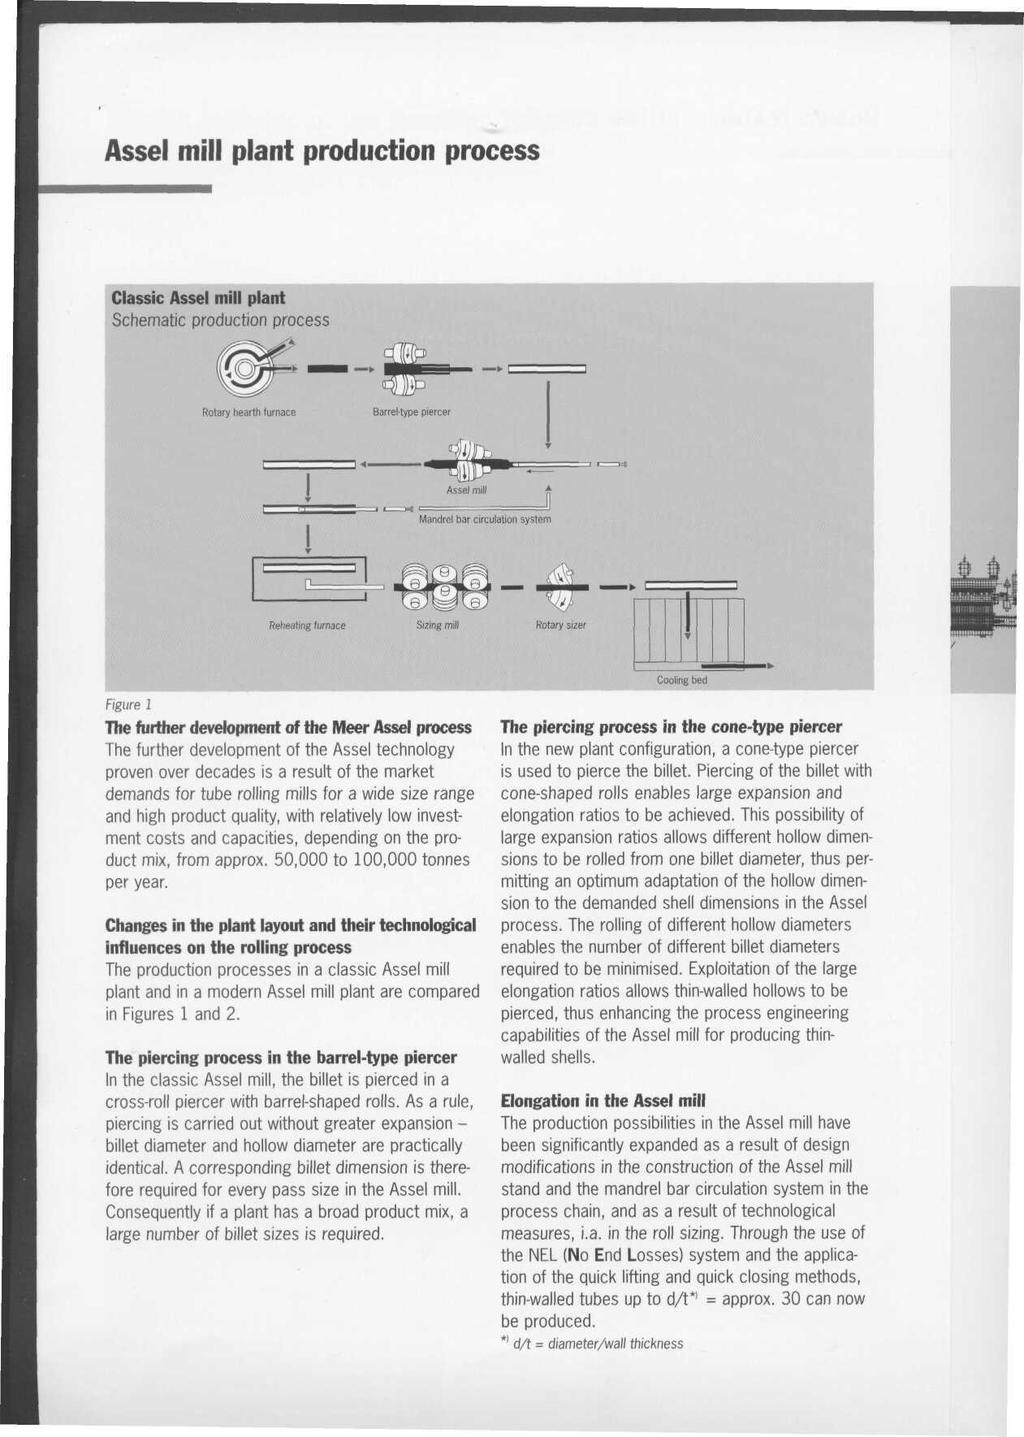 Assel mill plant production process Classic Assel mill plant Schematic production process Figure 1 The further development of the Meer Assel process The further development of the Assel technology